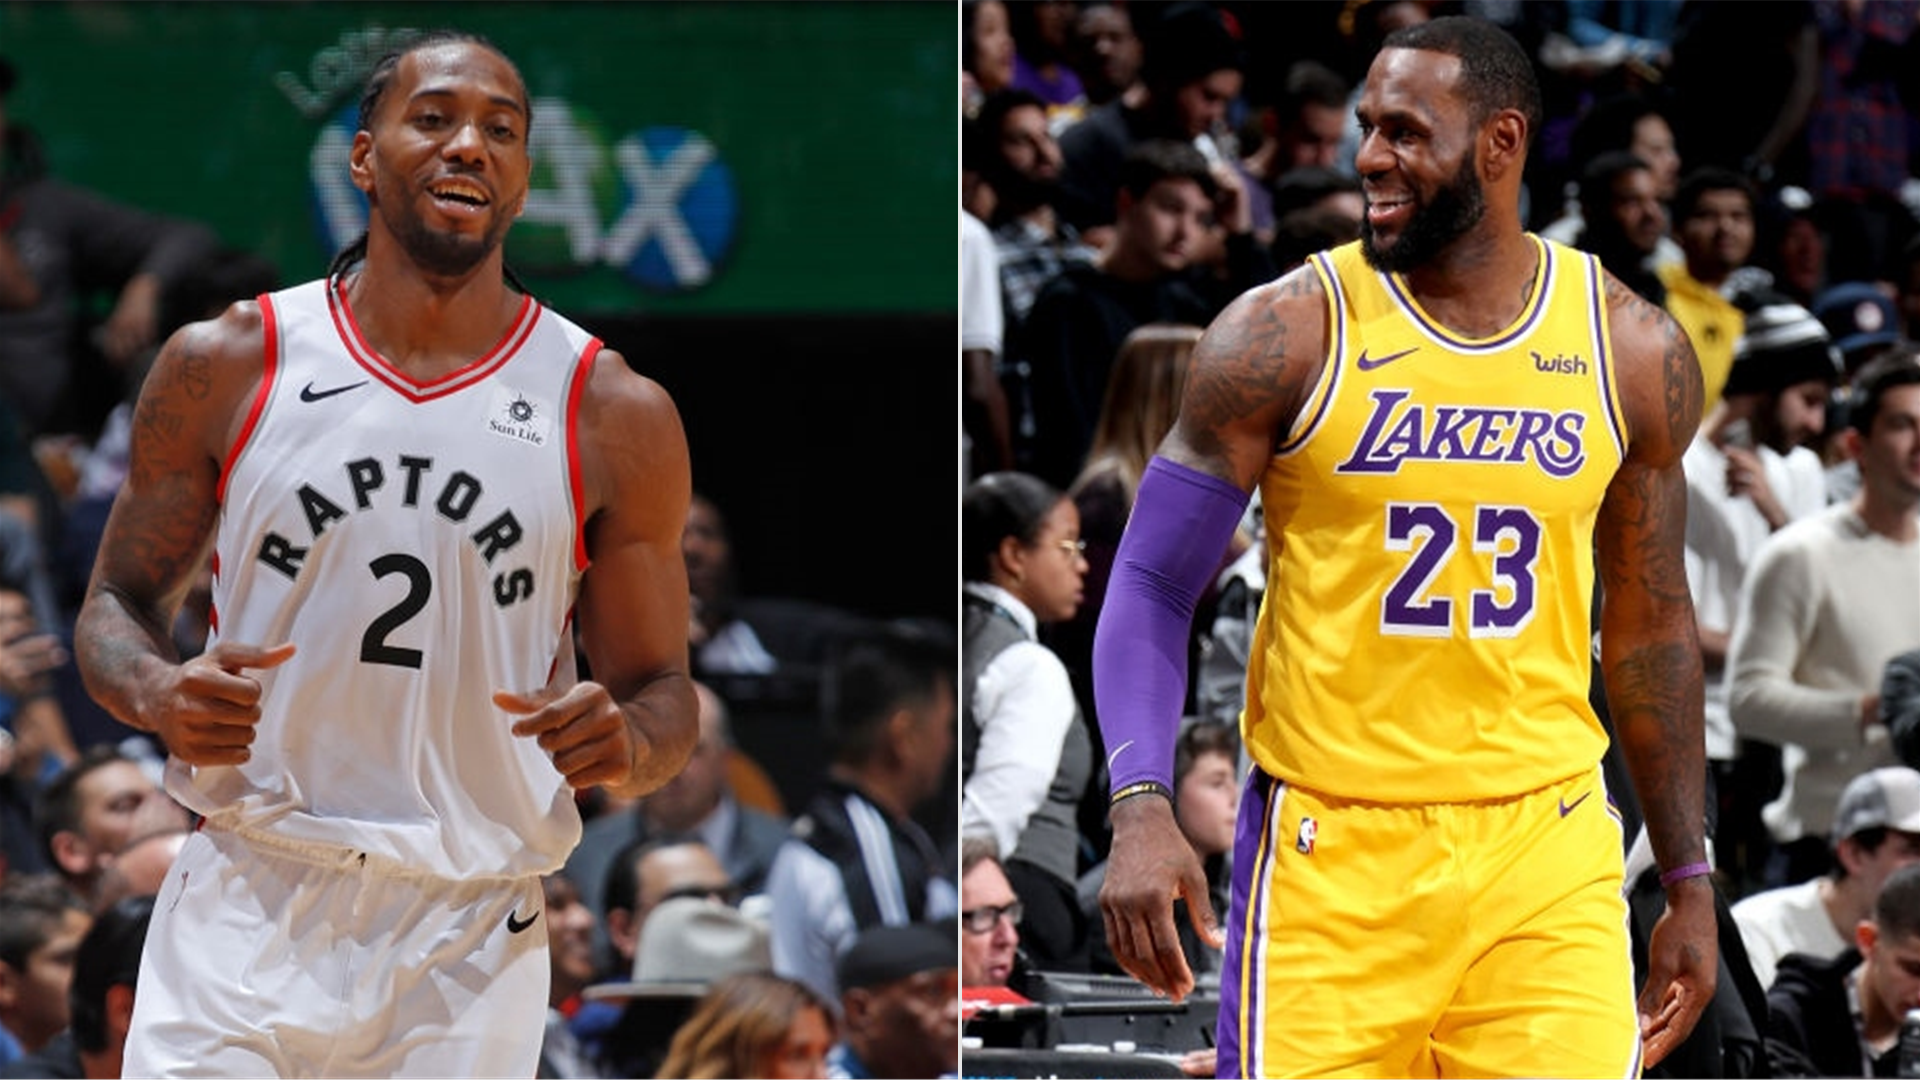 NBA All-Star Game 2019: Takeaways from the third fan vote results | NBA.com